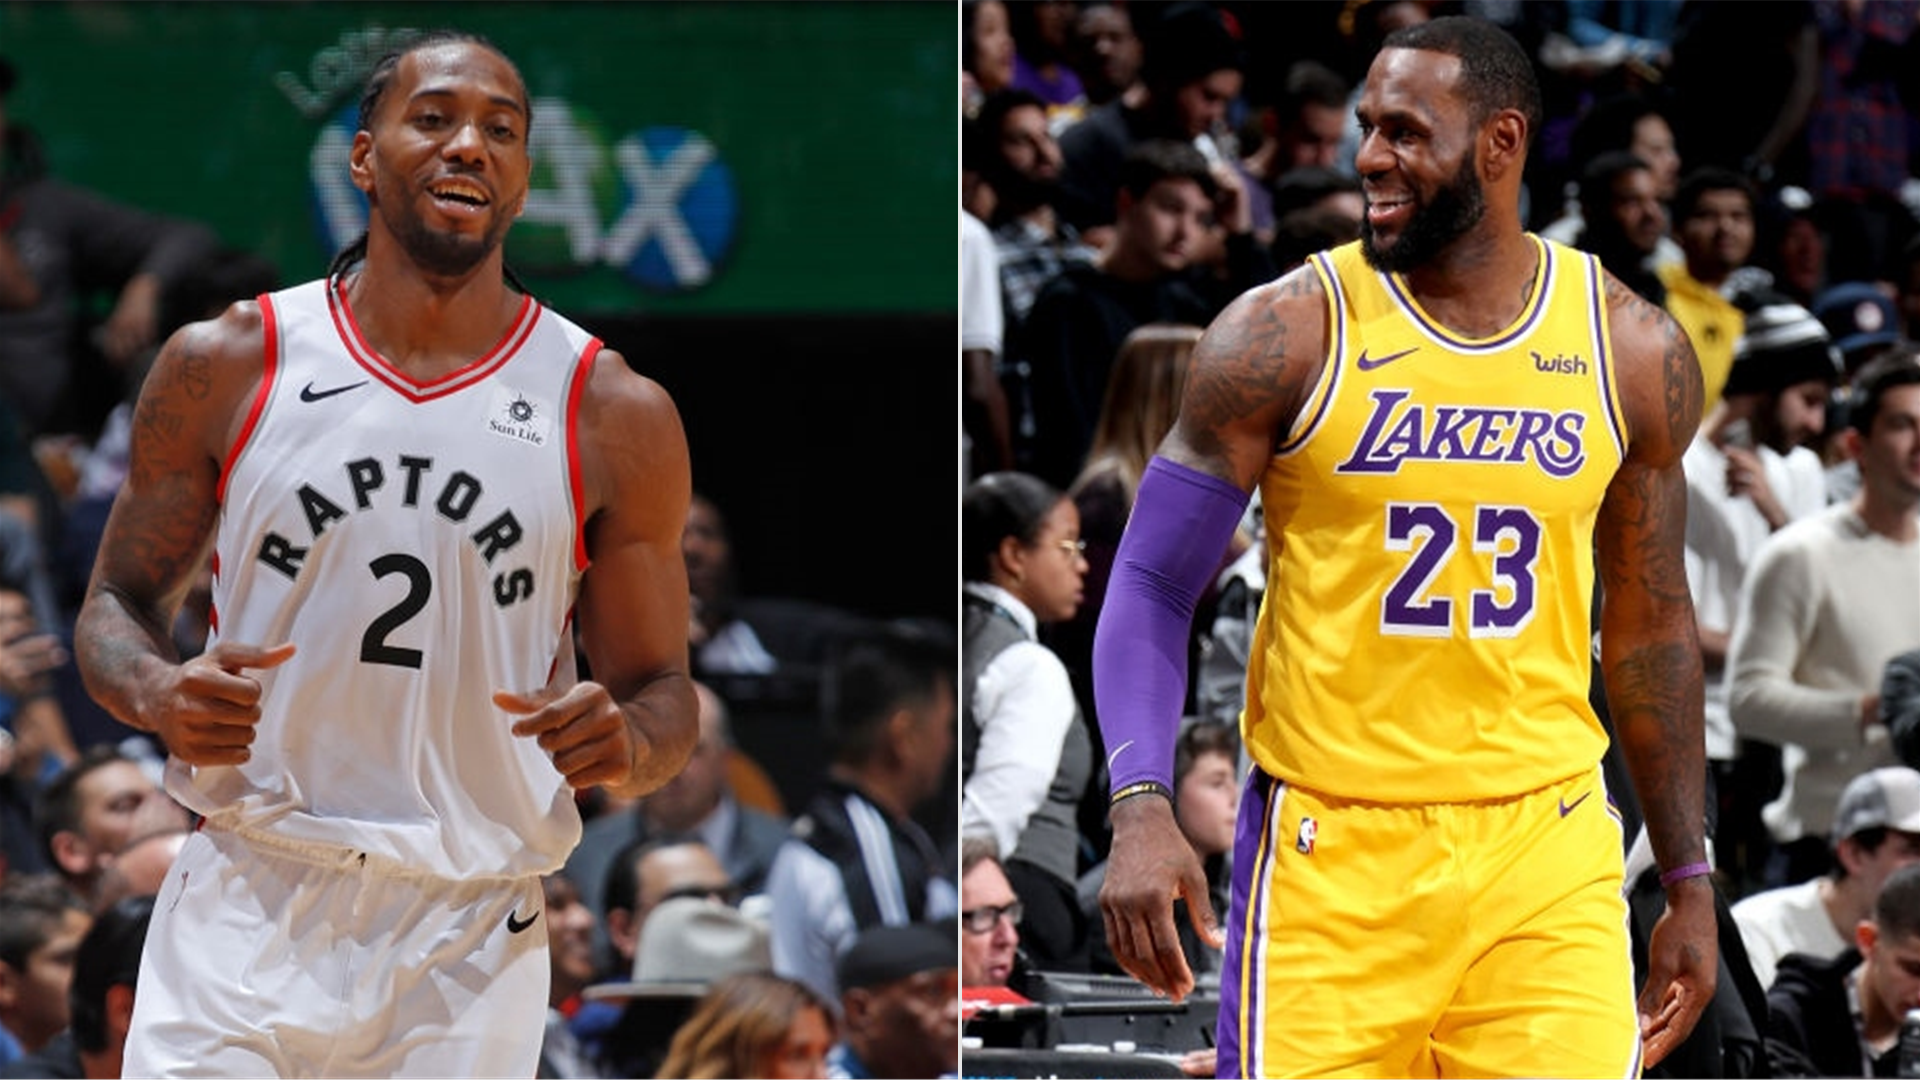 NBA All-Star Game 2019: Takeaways from the third fan vote results | NBA.com